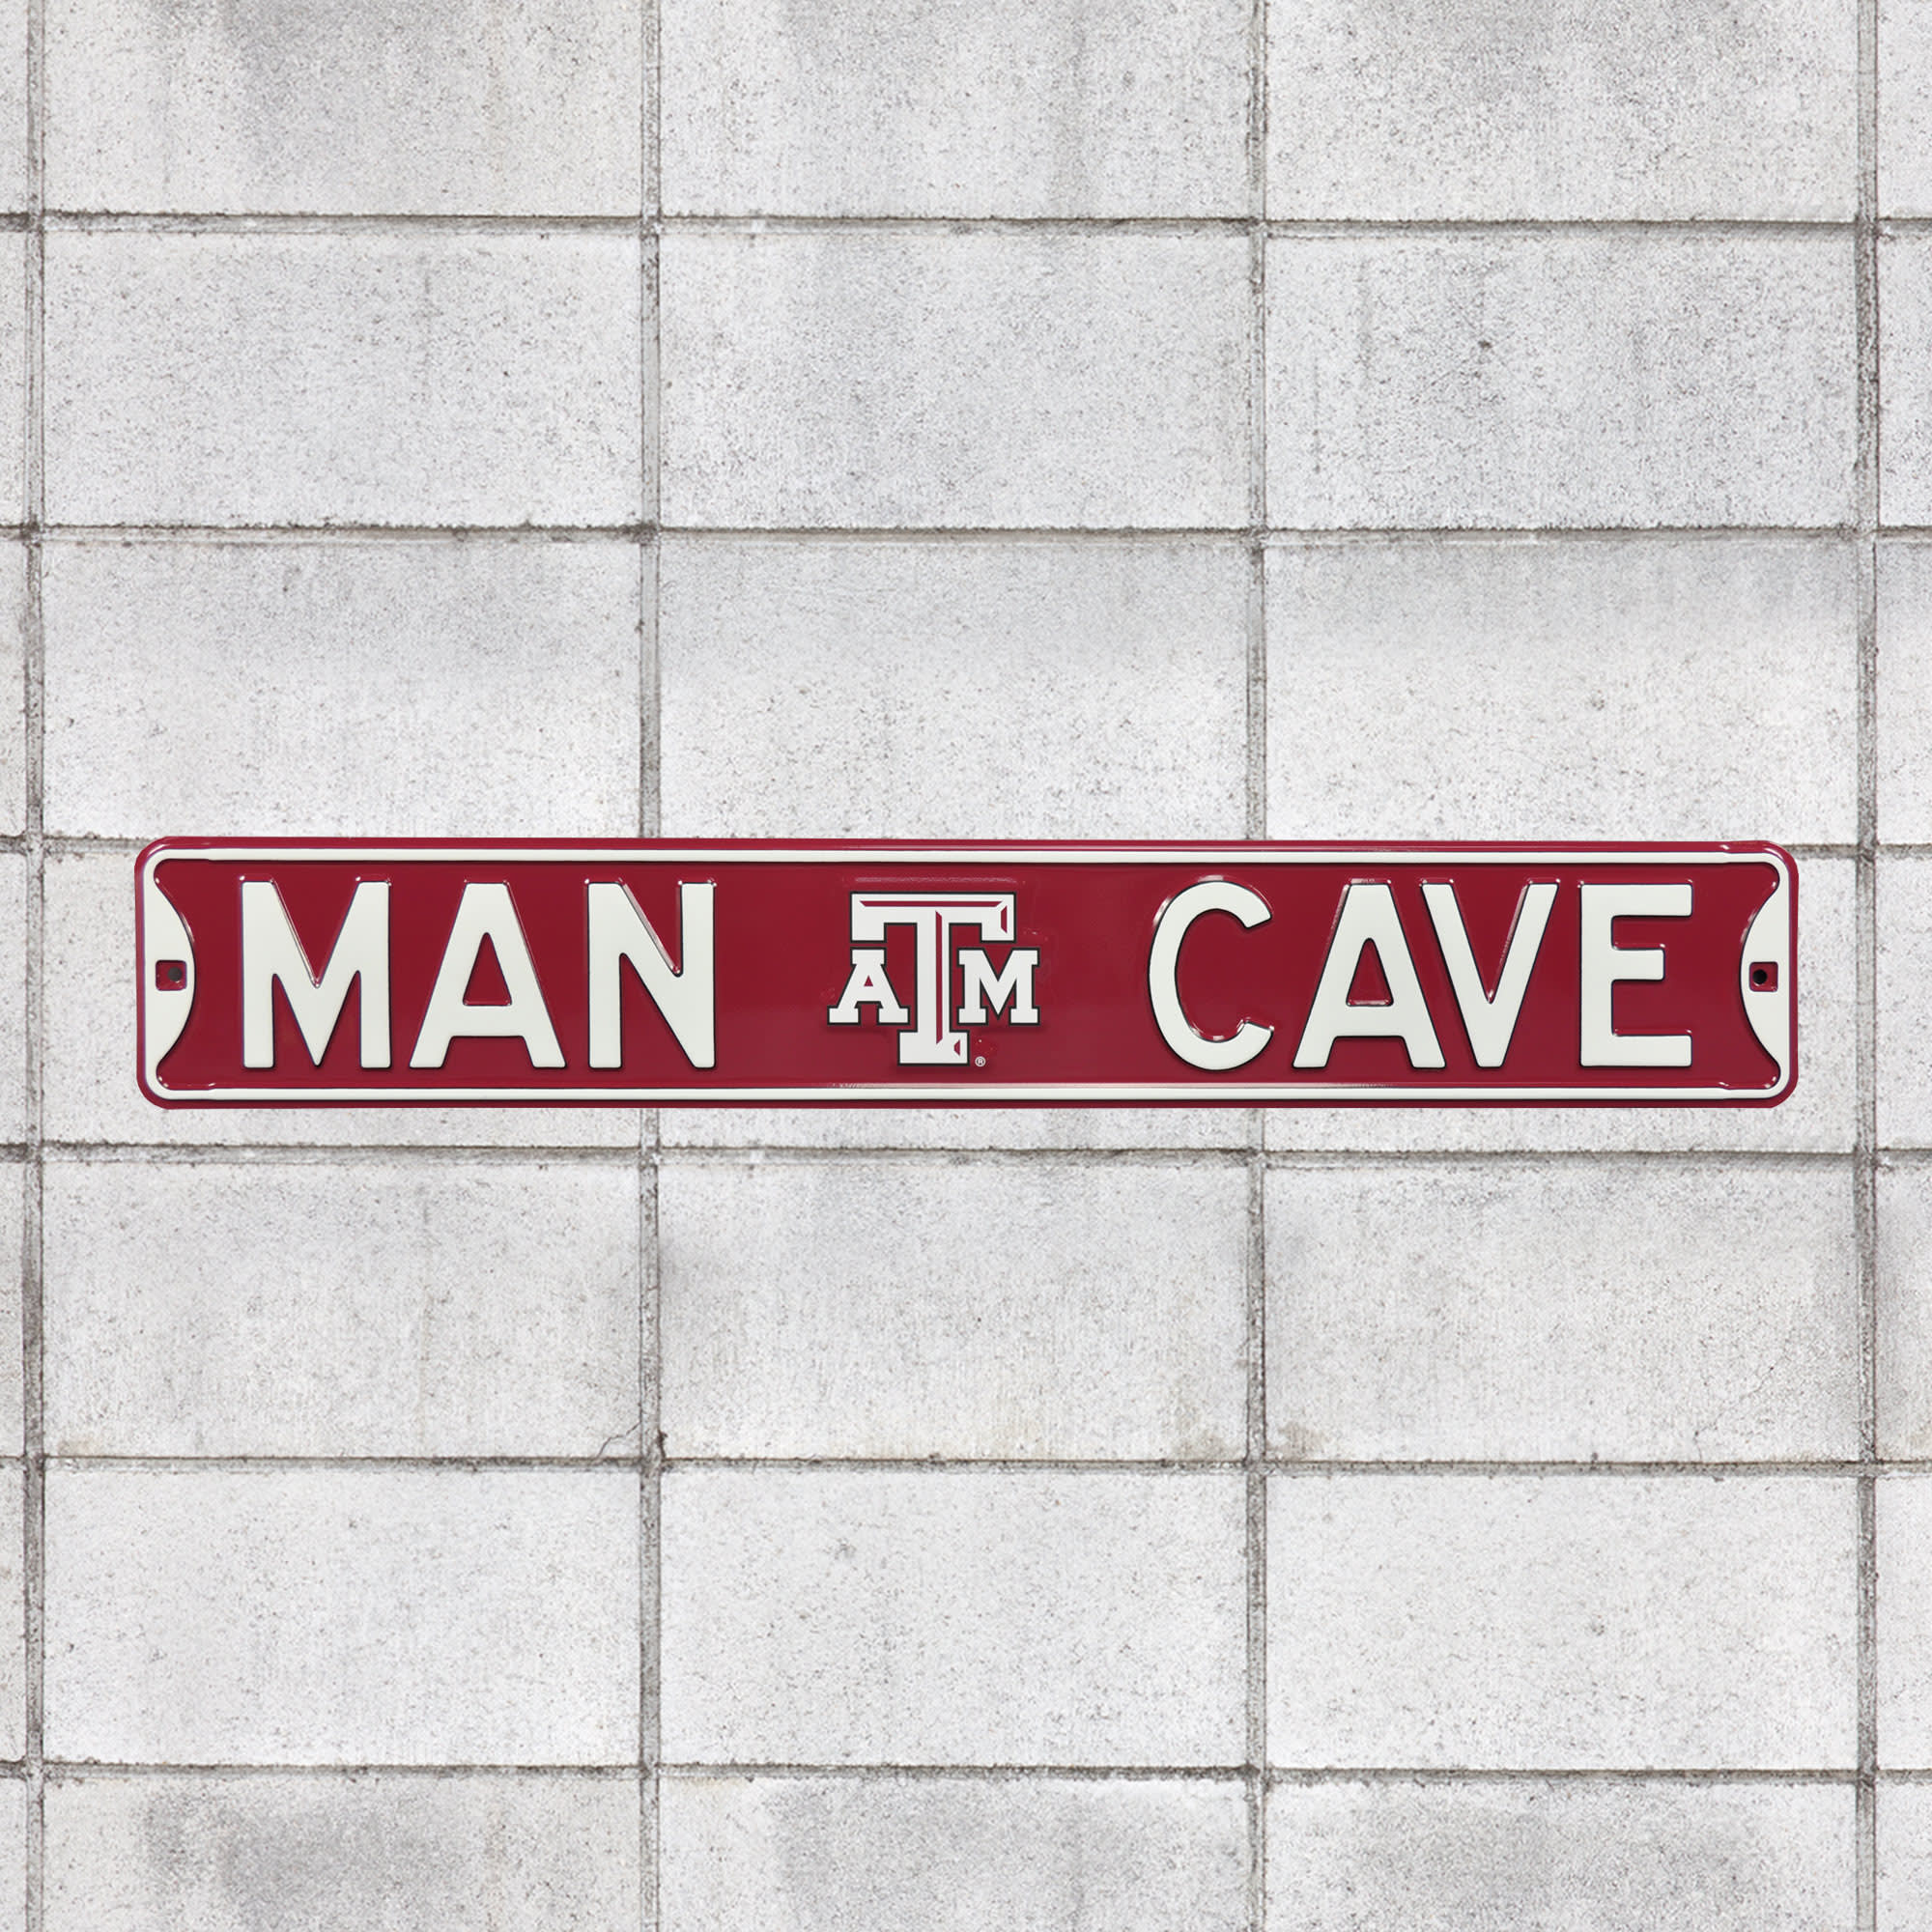 Texas A&M Aggies: Man Cave - Officially Licensed Metal Street Sign 36.0"W x 6.0"H by Fathead | 100% Steel